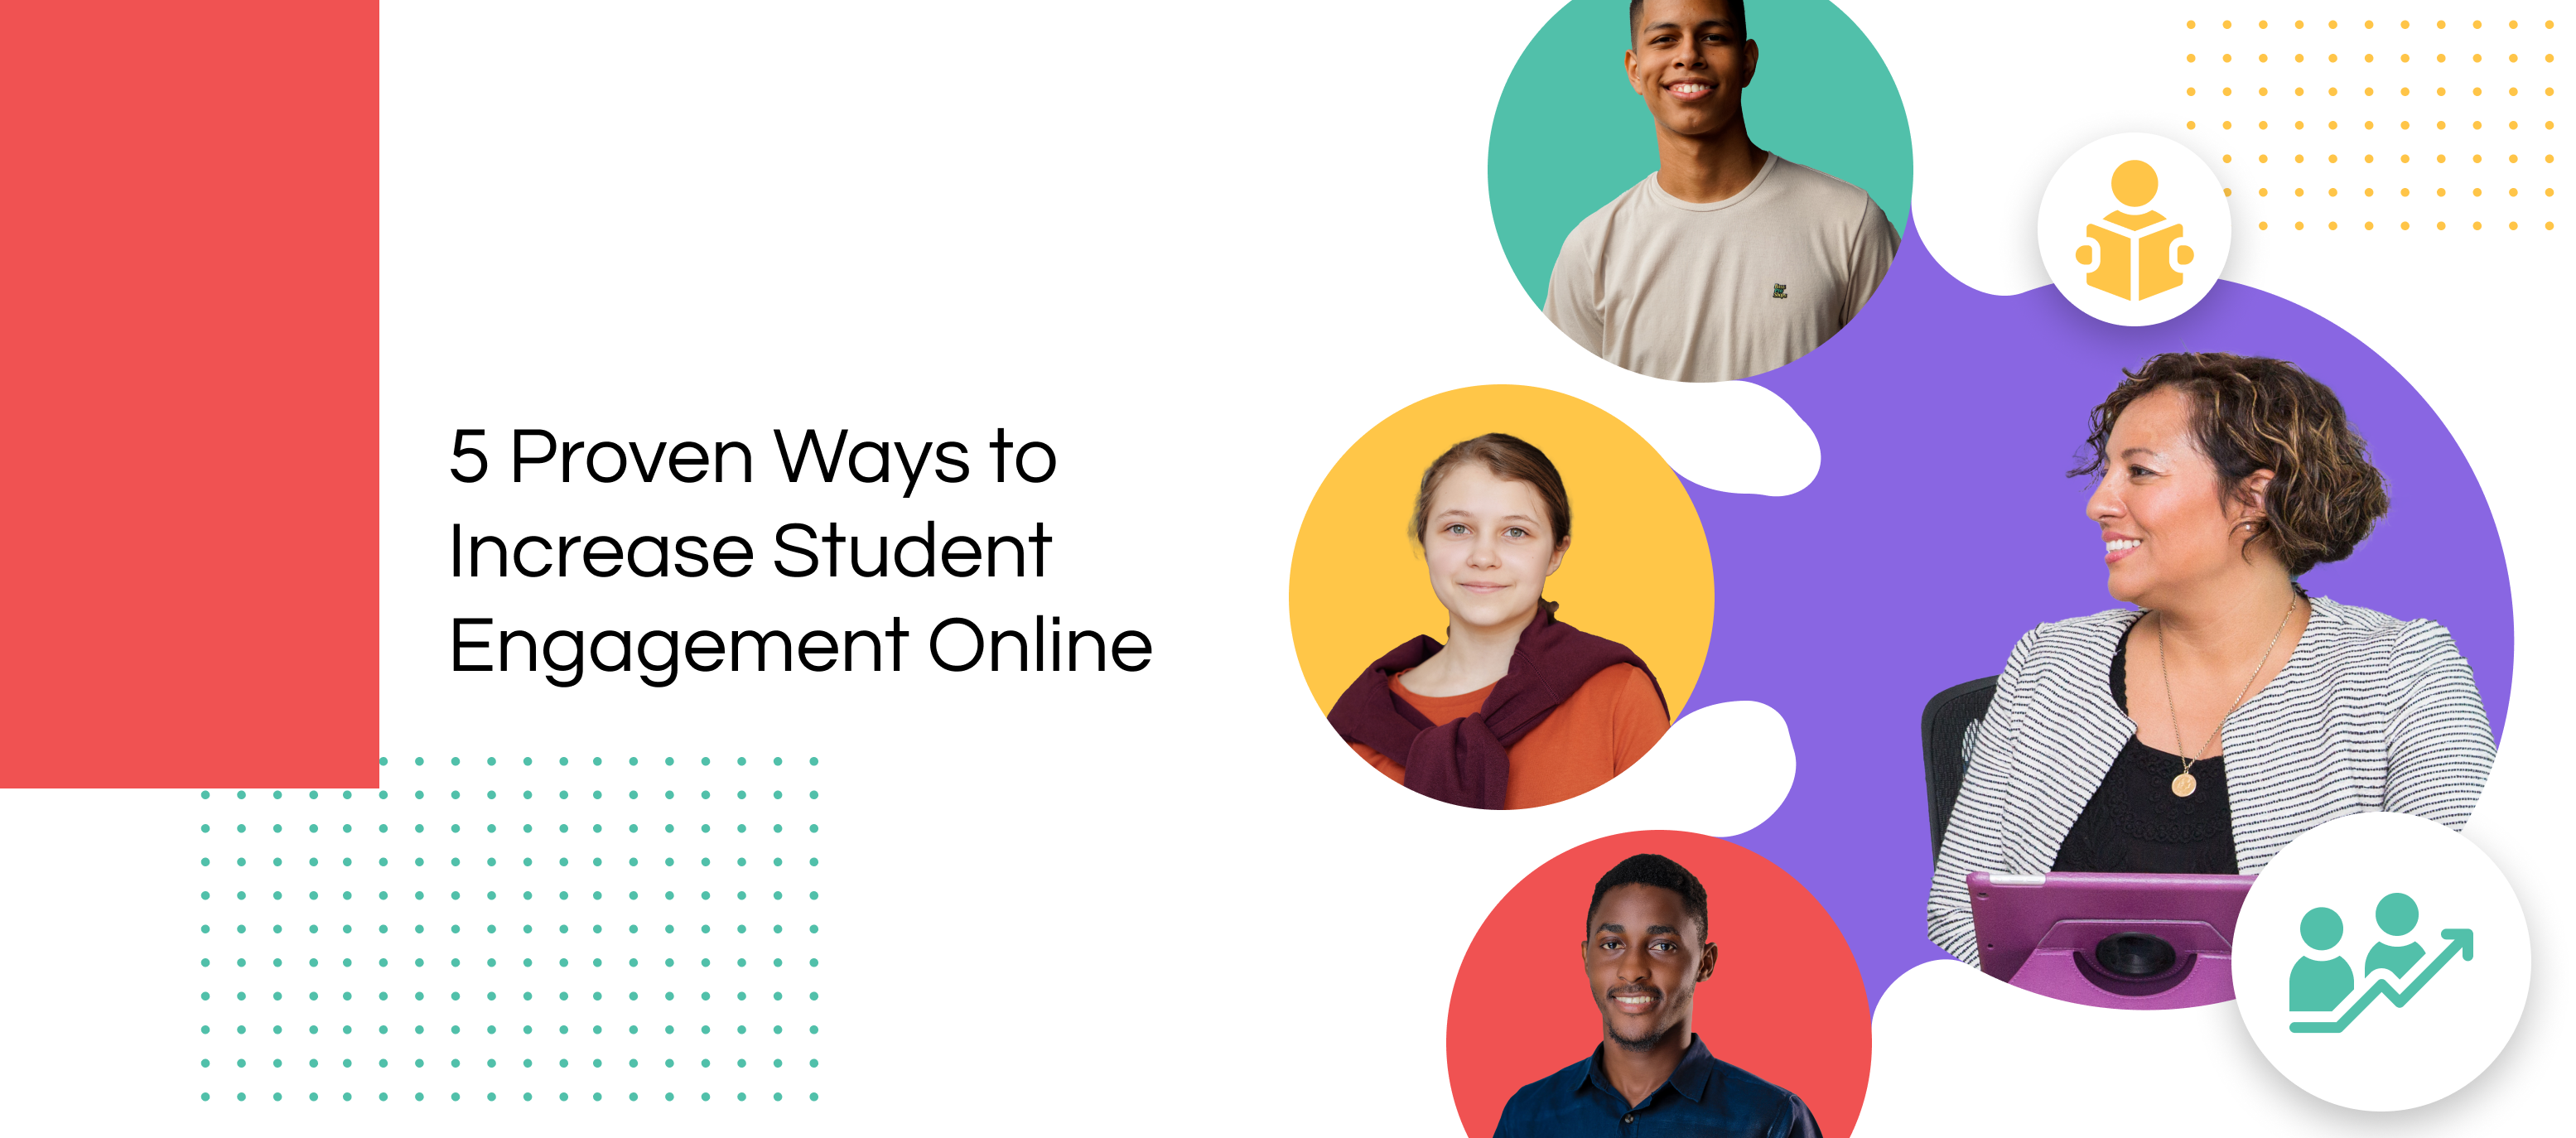 Moving Your Class Online? Tips for Keeping Students Engaged